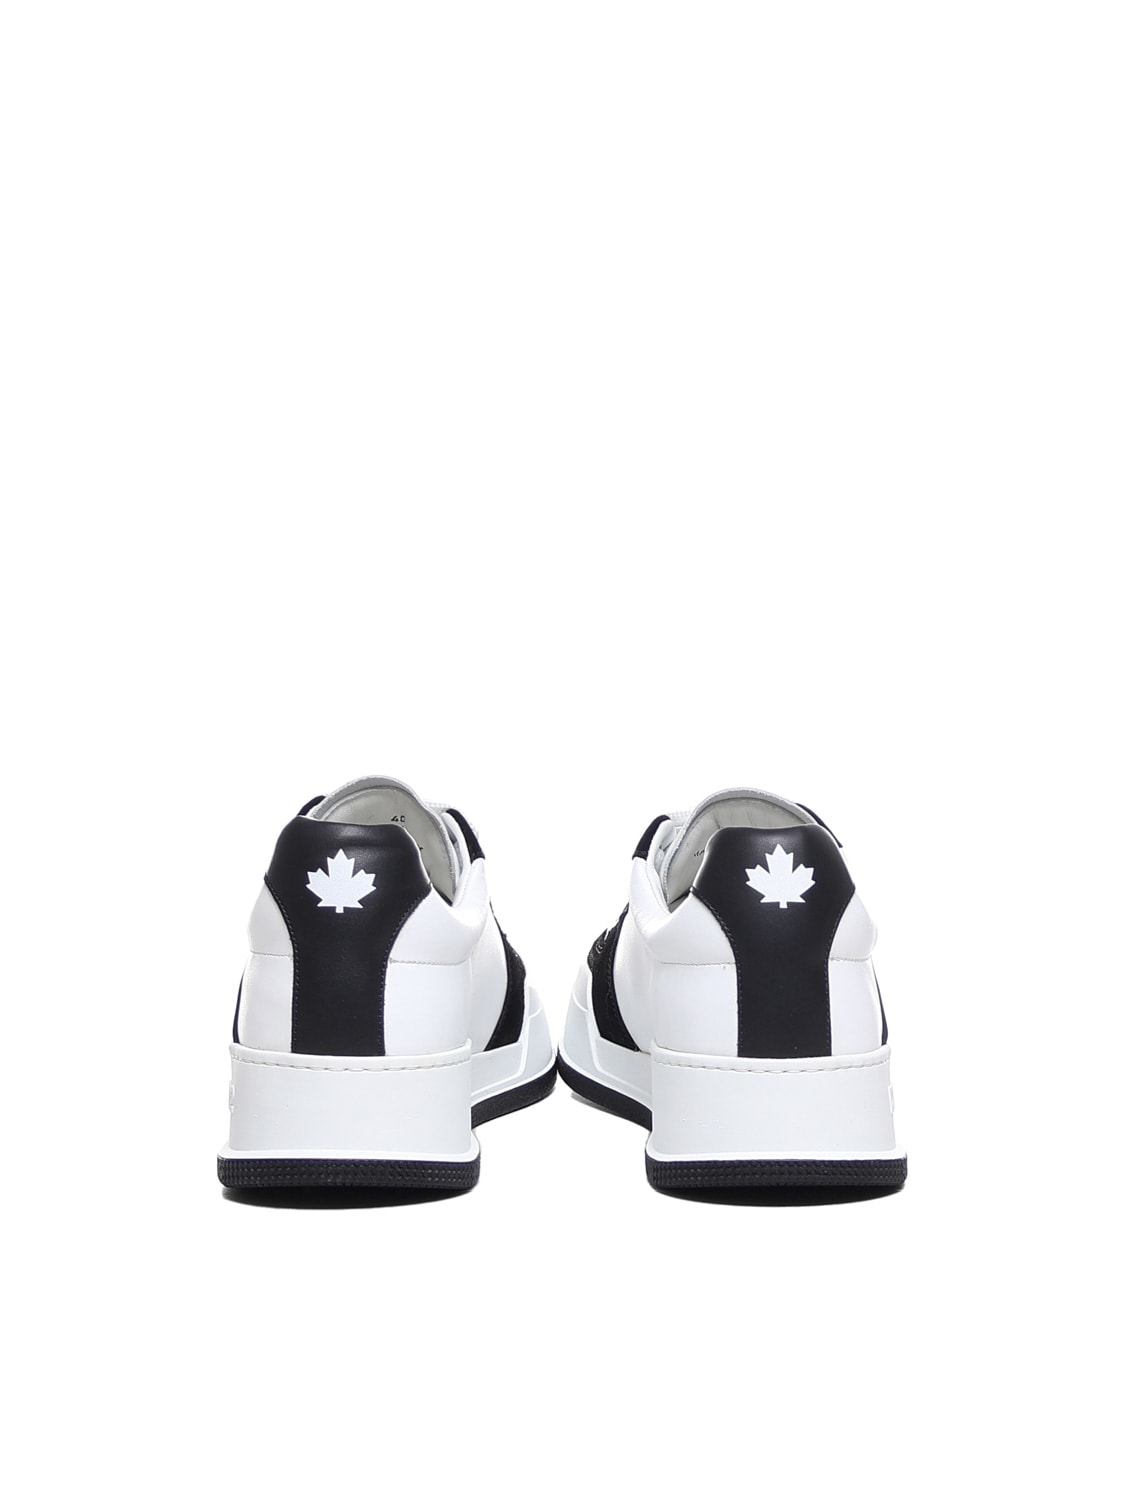 Shop Dsquared2 Canadian Sneakers In Black, White